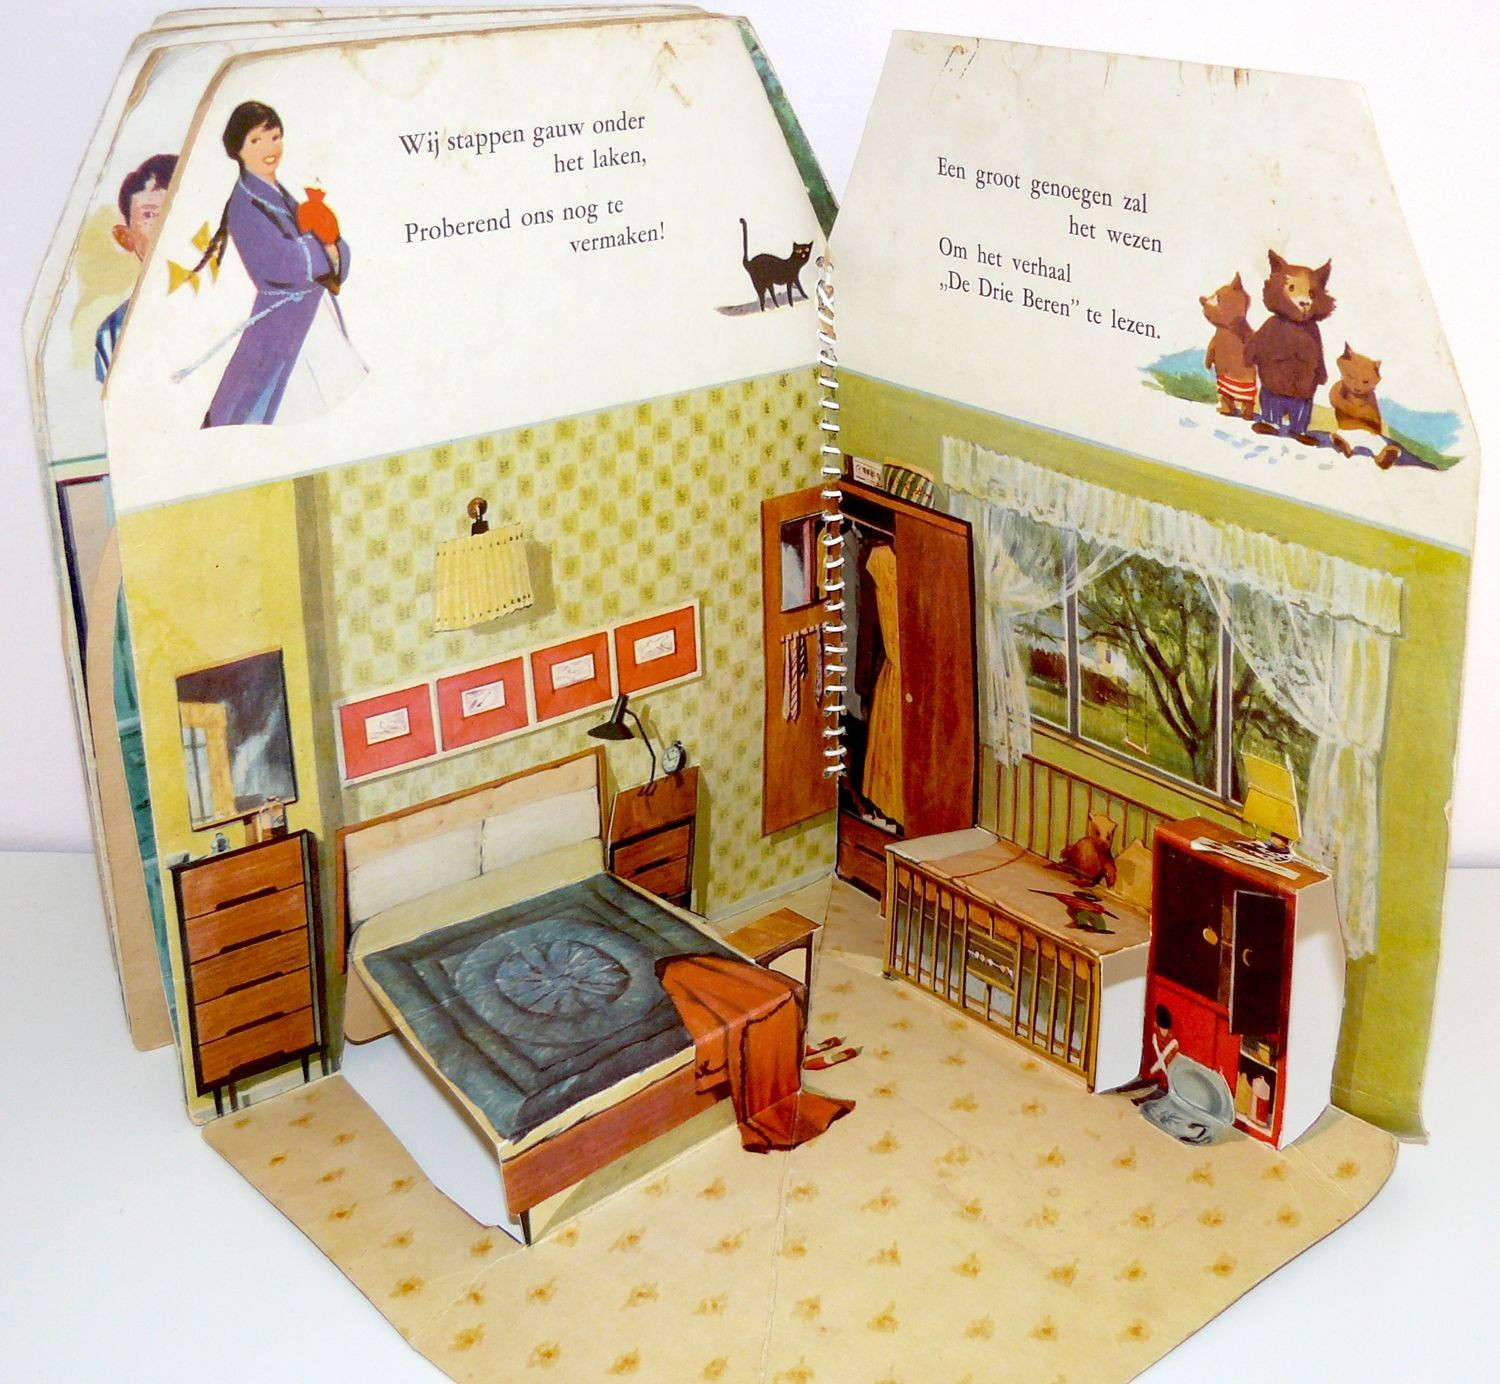 Papercraft Dollhouse Vintage Pop Up Book "doll House" by Marion Moss 1946